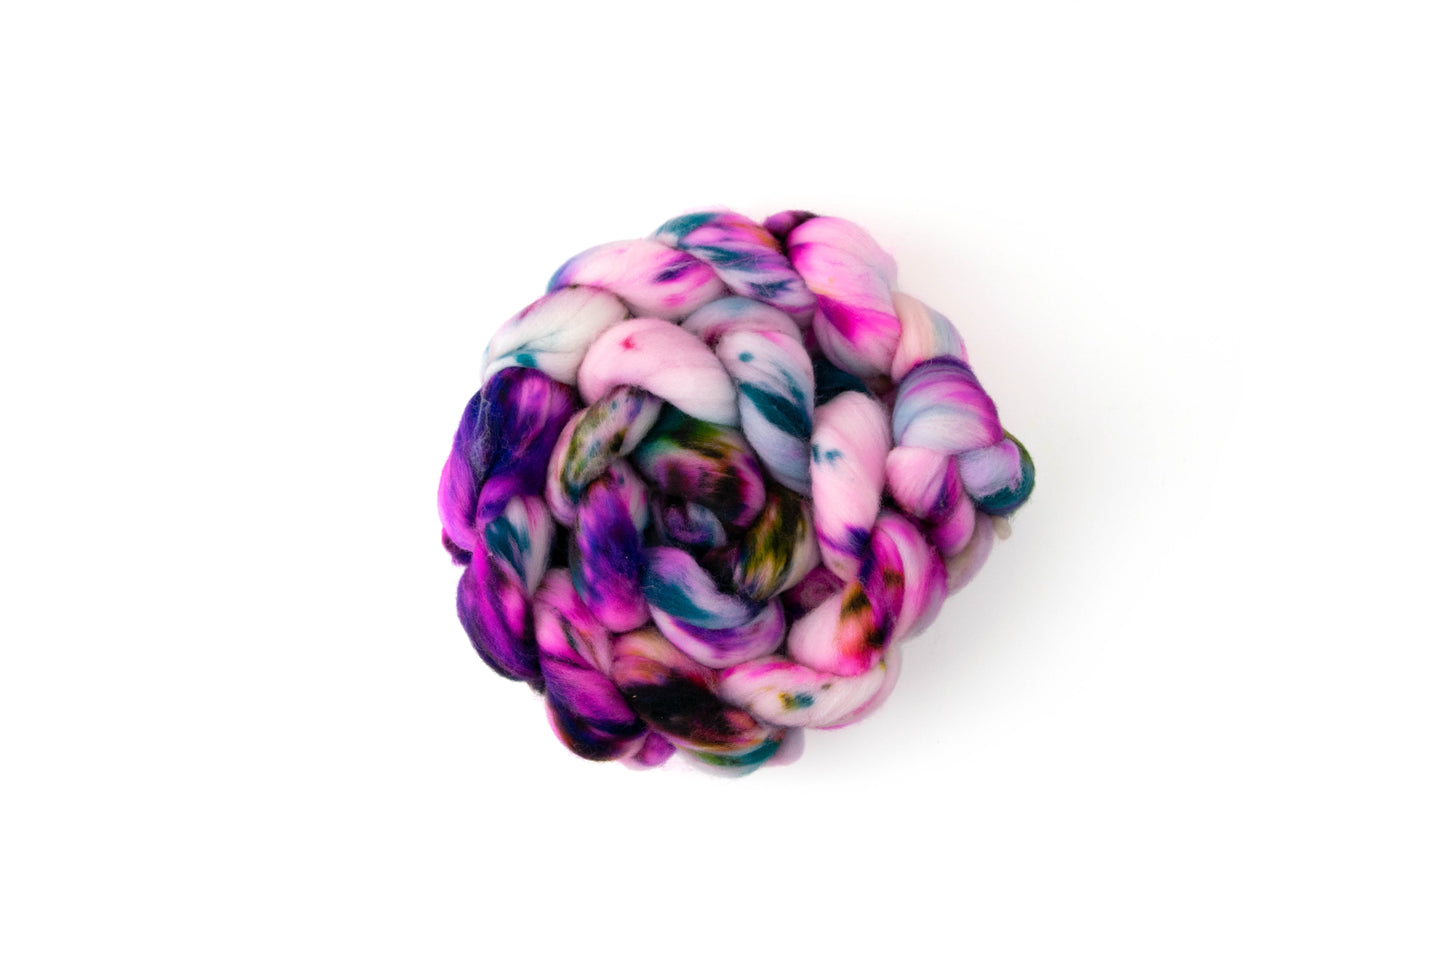 A braid of fiber with pink, purple, blue, and green sections.